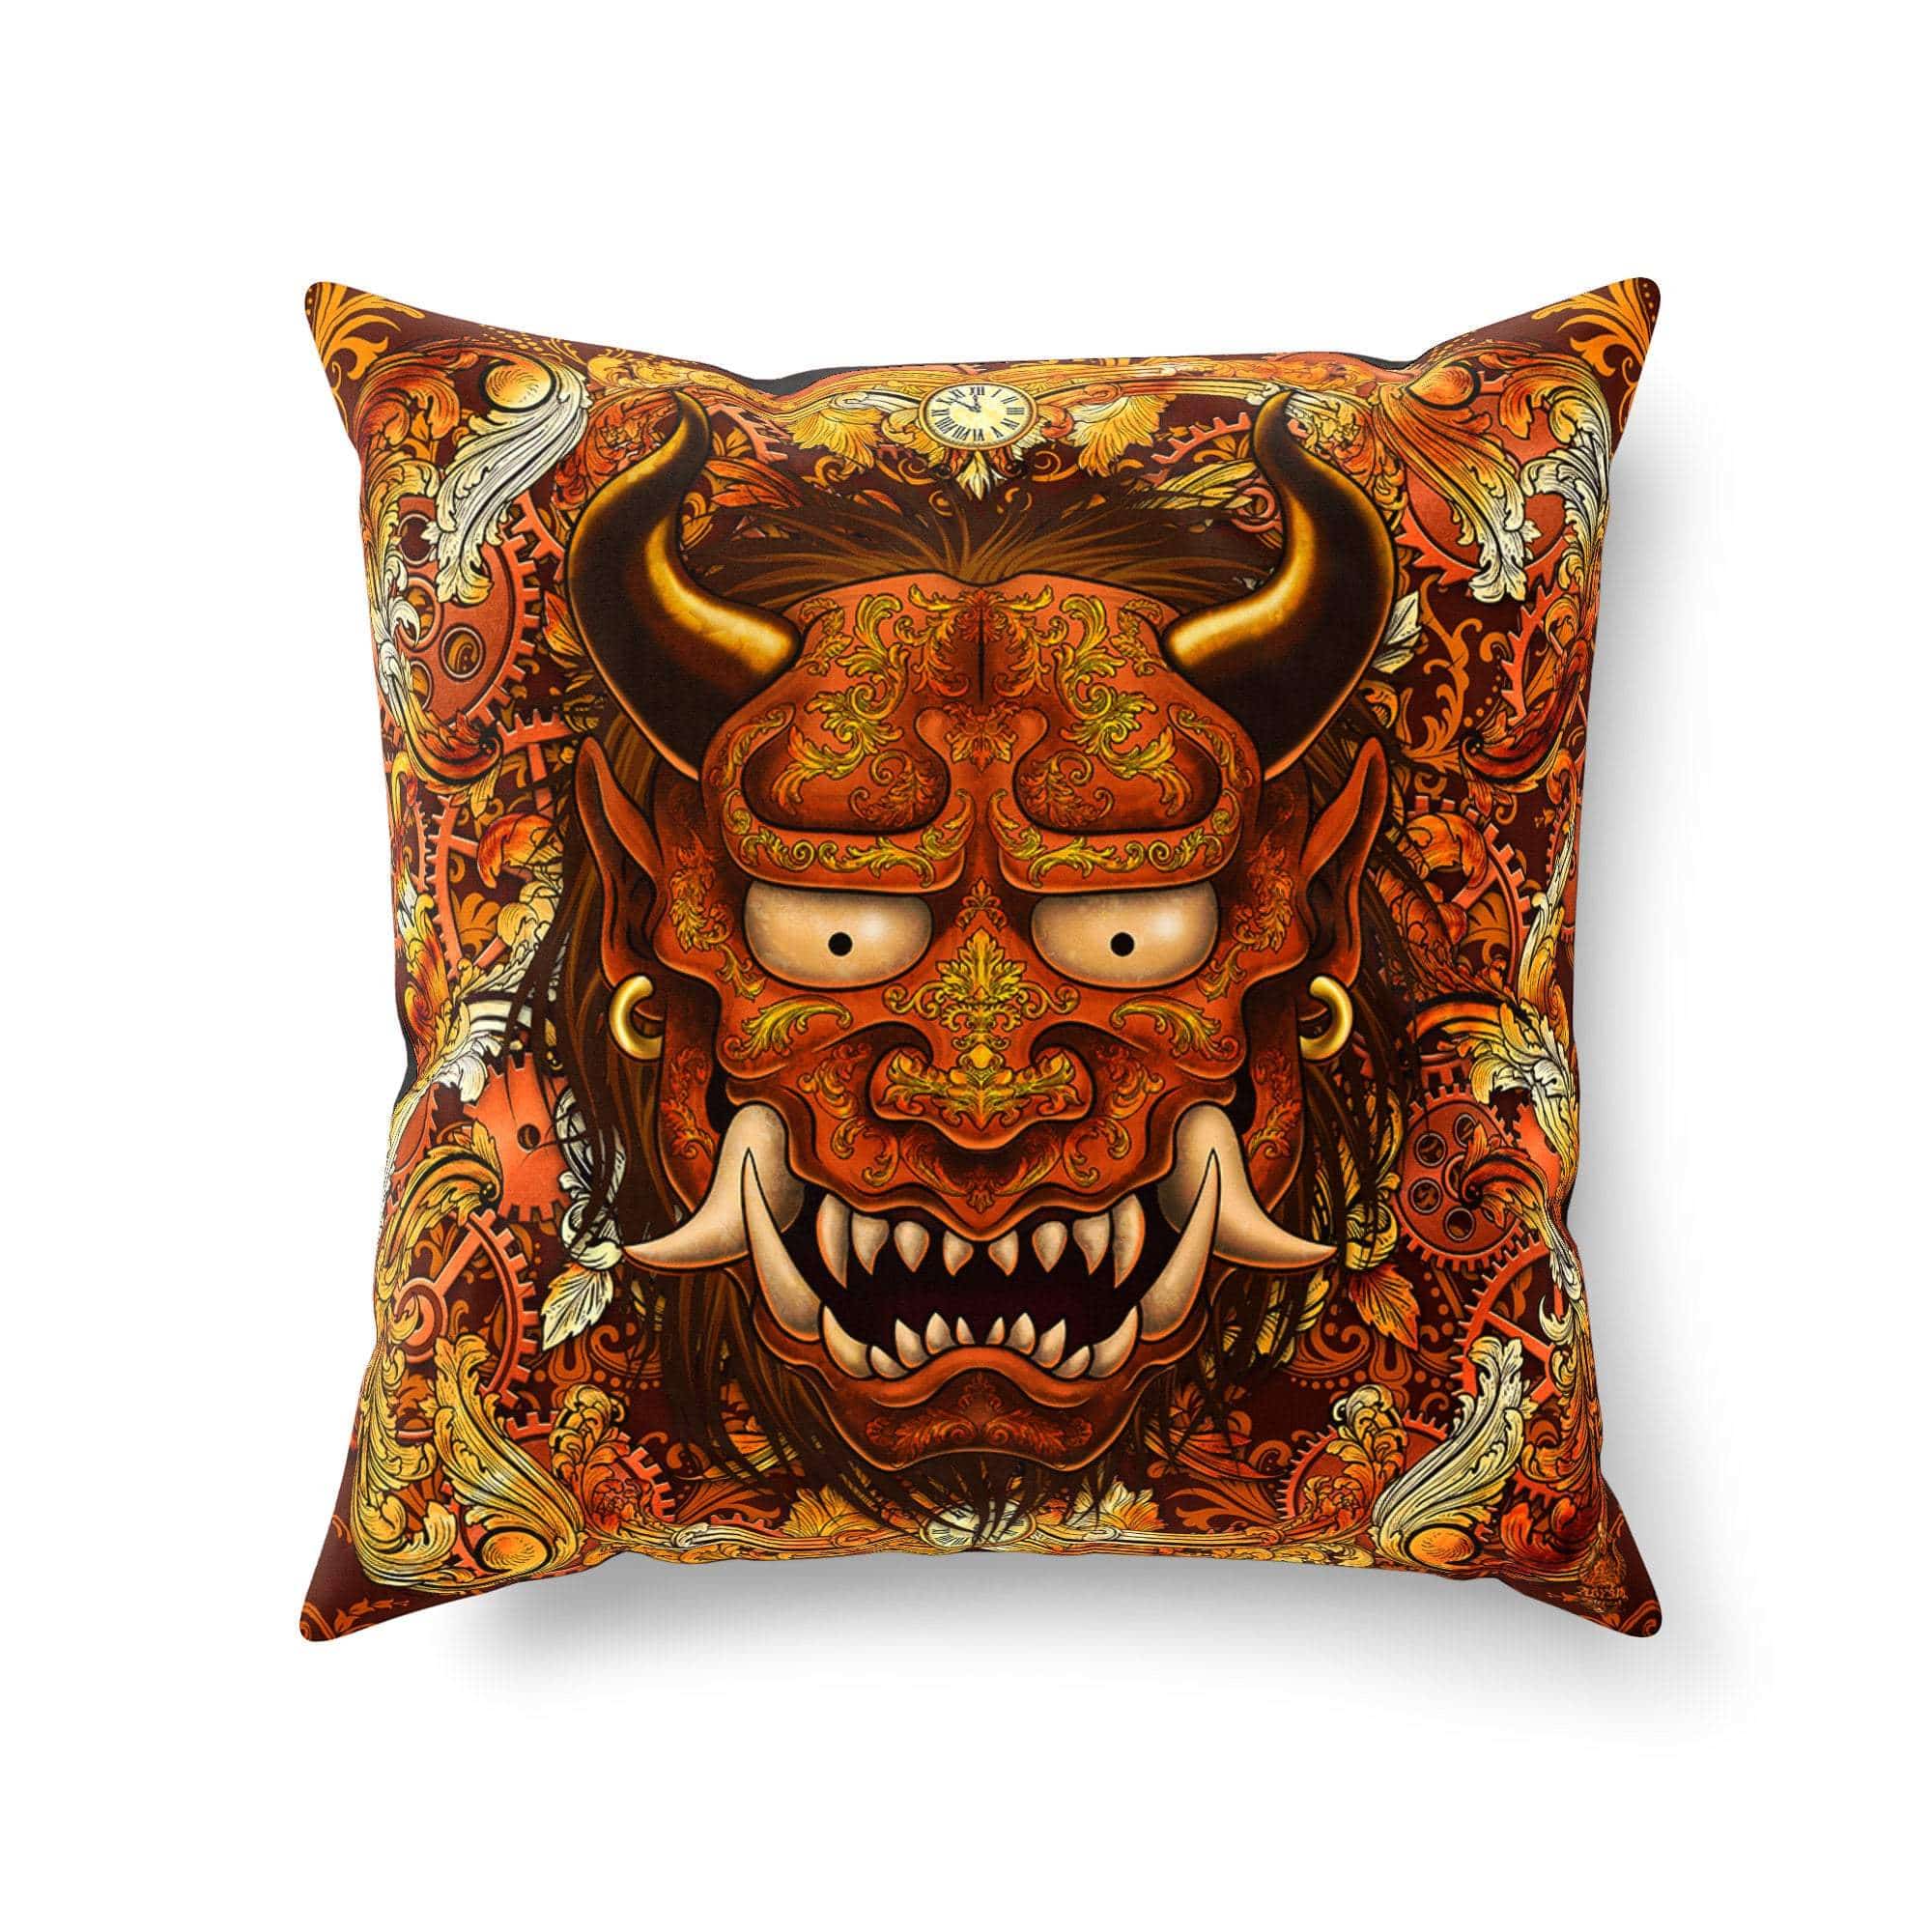 Oni Throw Pillow, Decorative Accent Cushion, Hannya, Japanese Demon, Anime and Gamer Room Decor - Steampunk - Abysm Internal